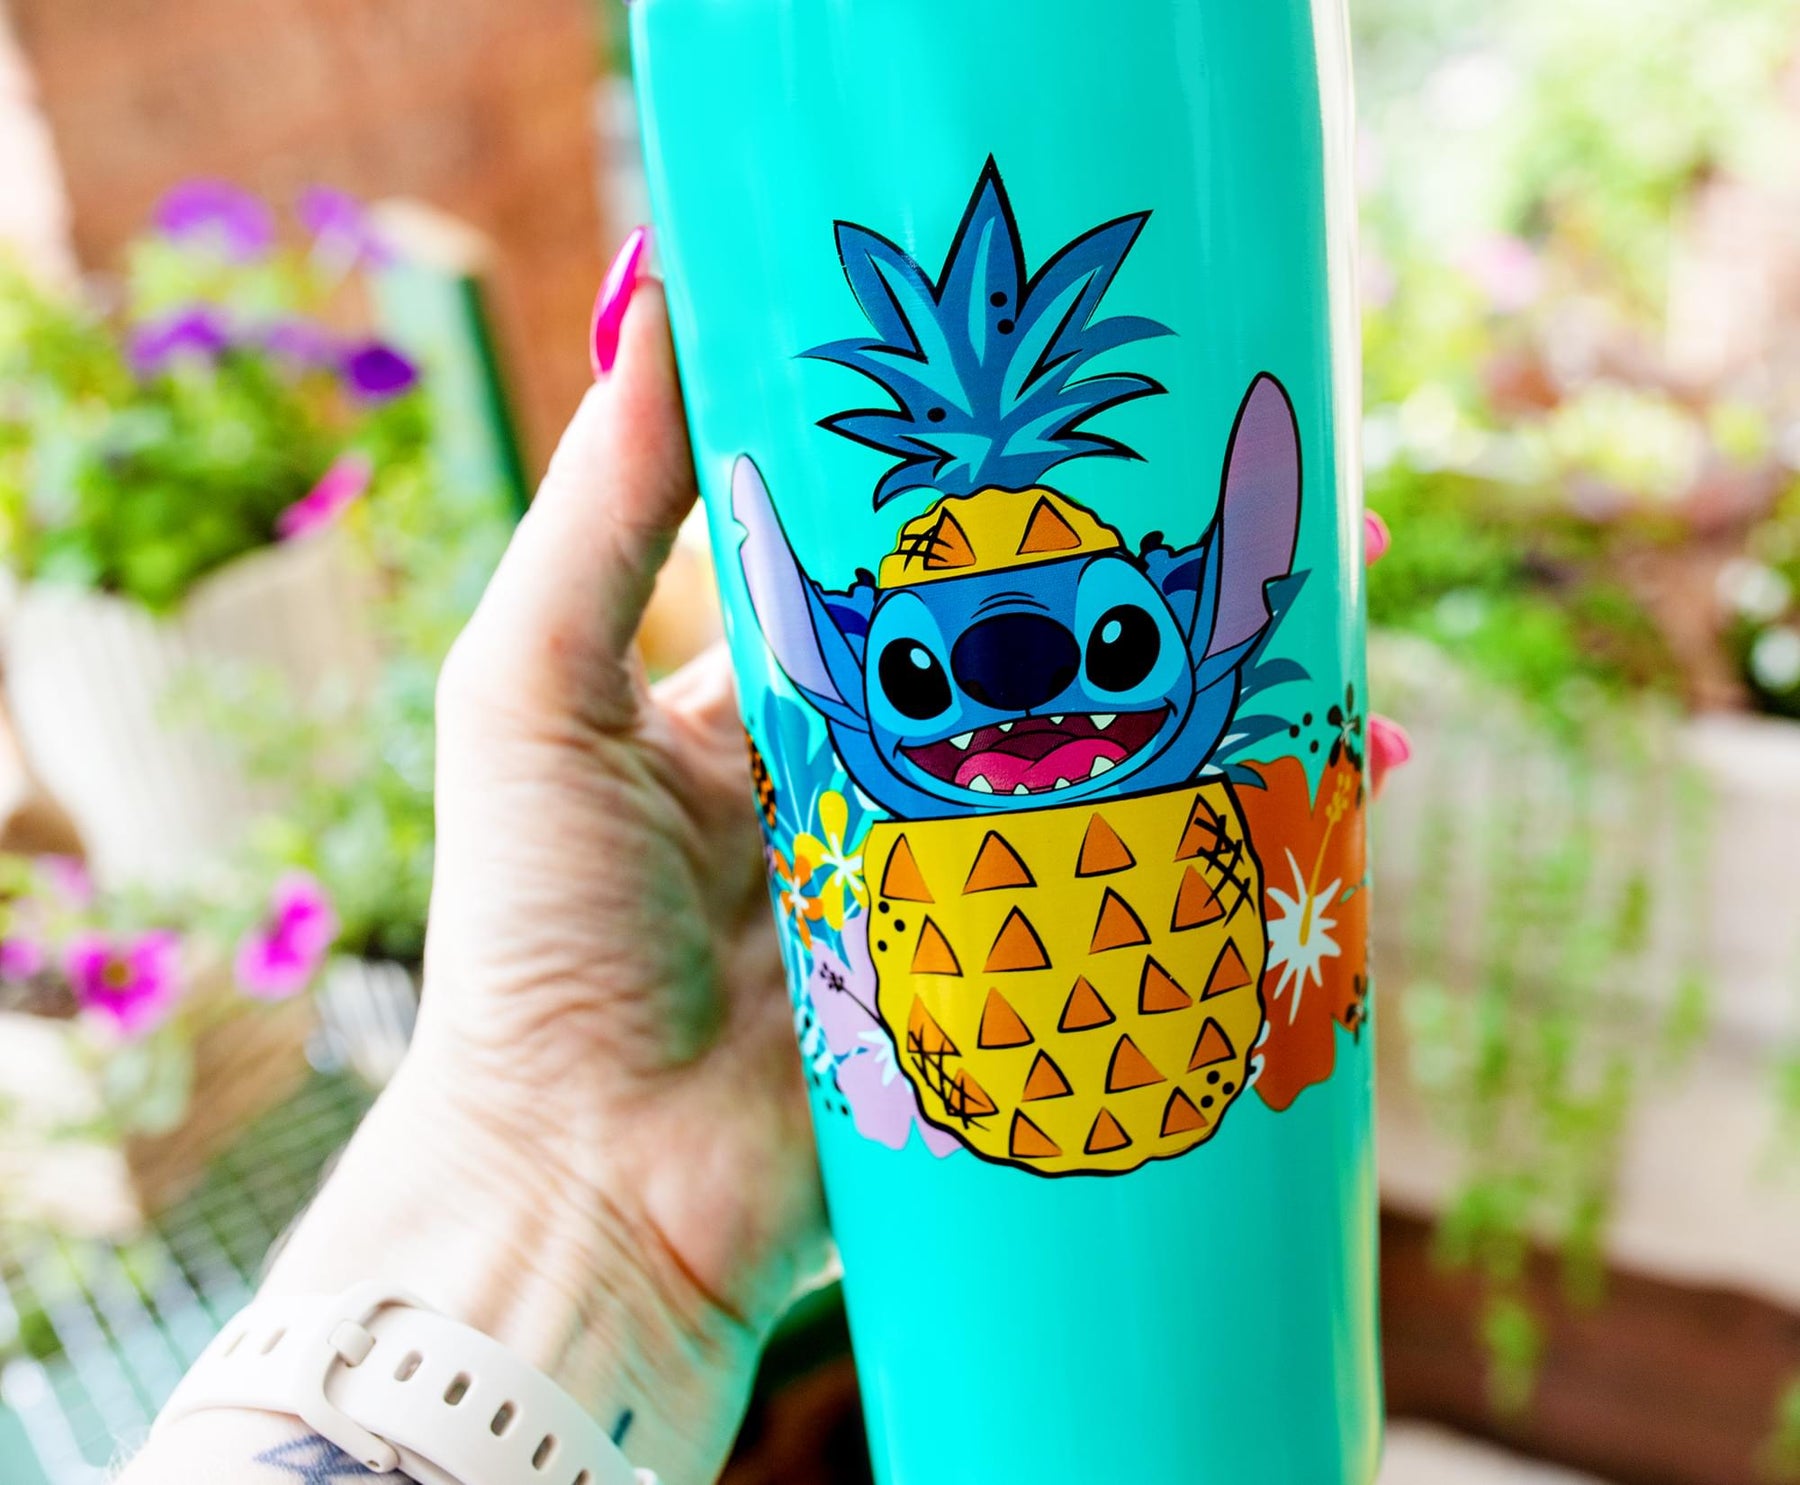 Disney Lilo And Stitch Stainless Steel Tumbler Hot Or Cold Lid Straw 22 oz